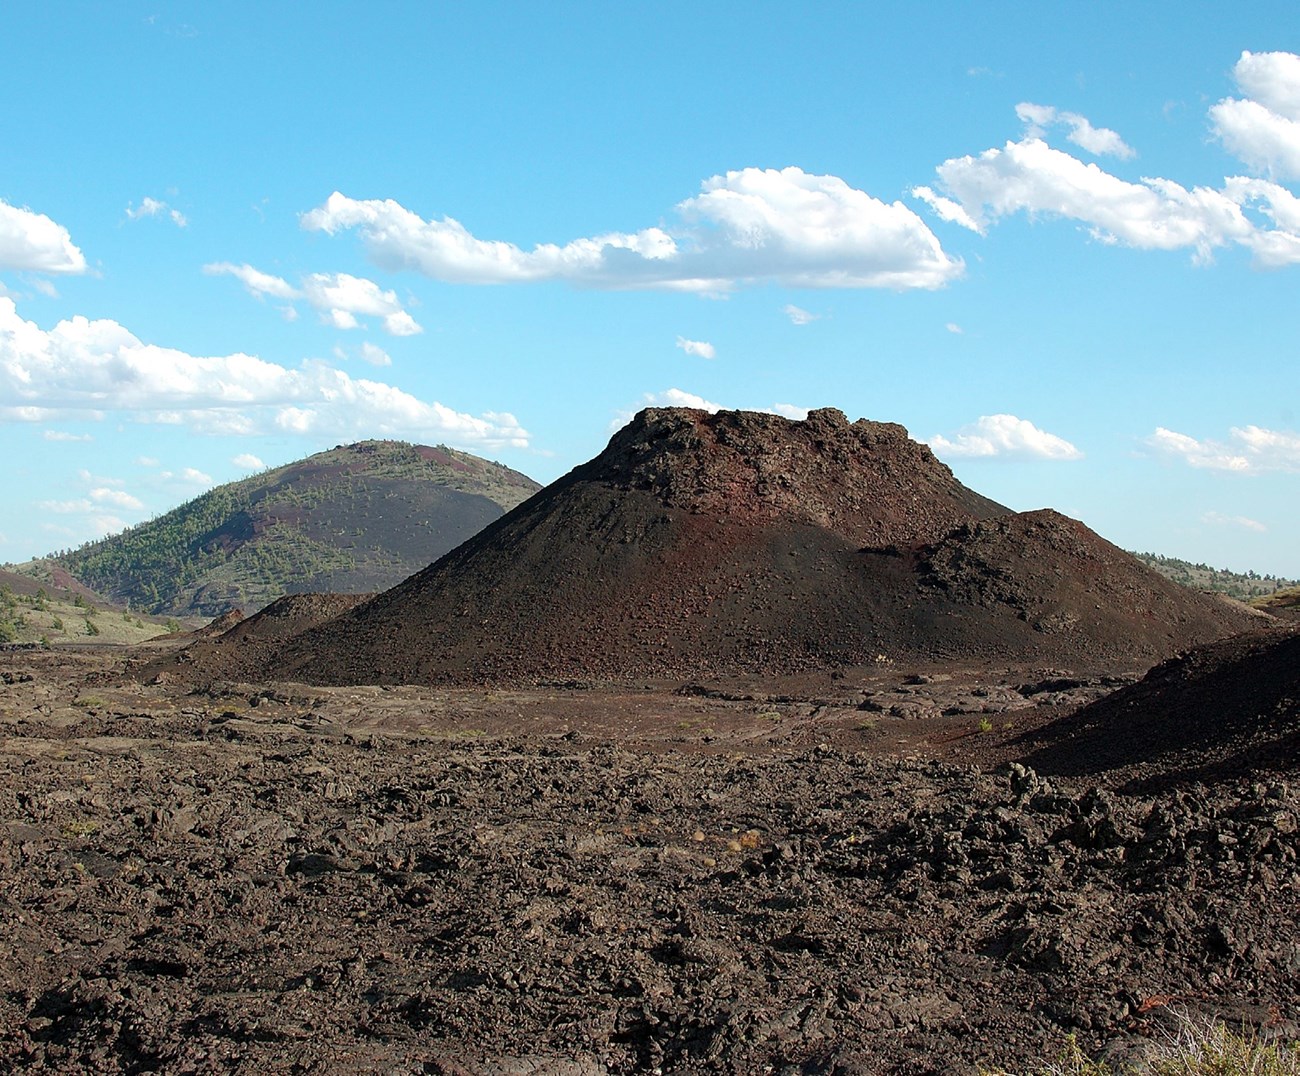 photo of a rocky volcanic cone with a large rounded volcanic peak in the distance